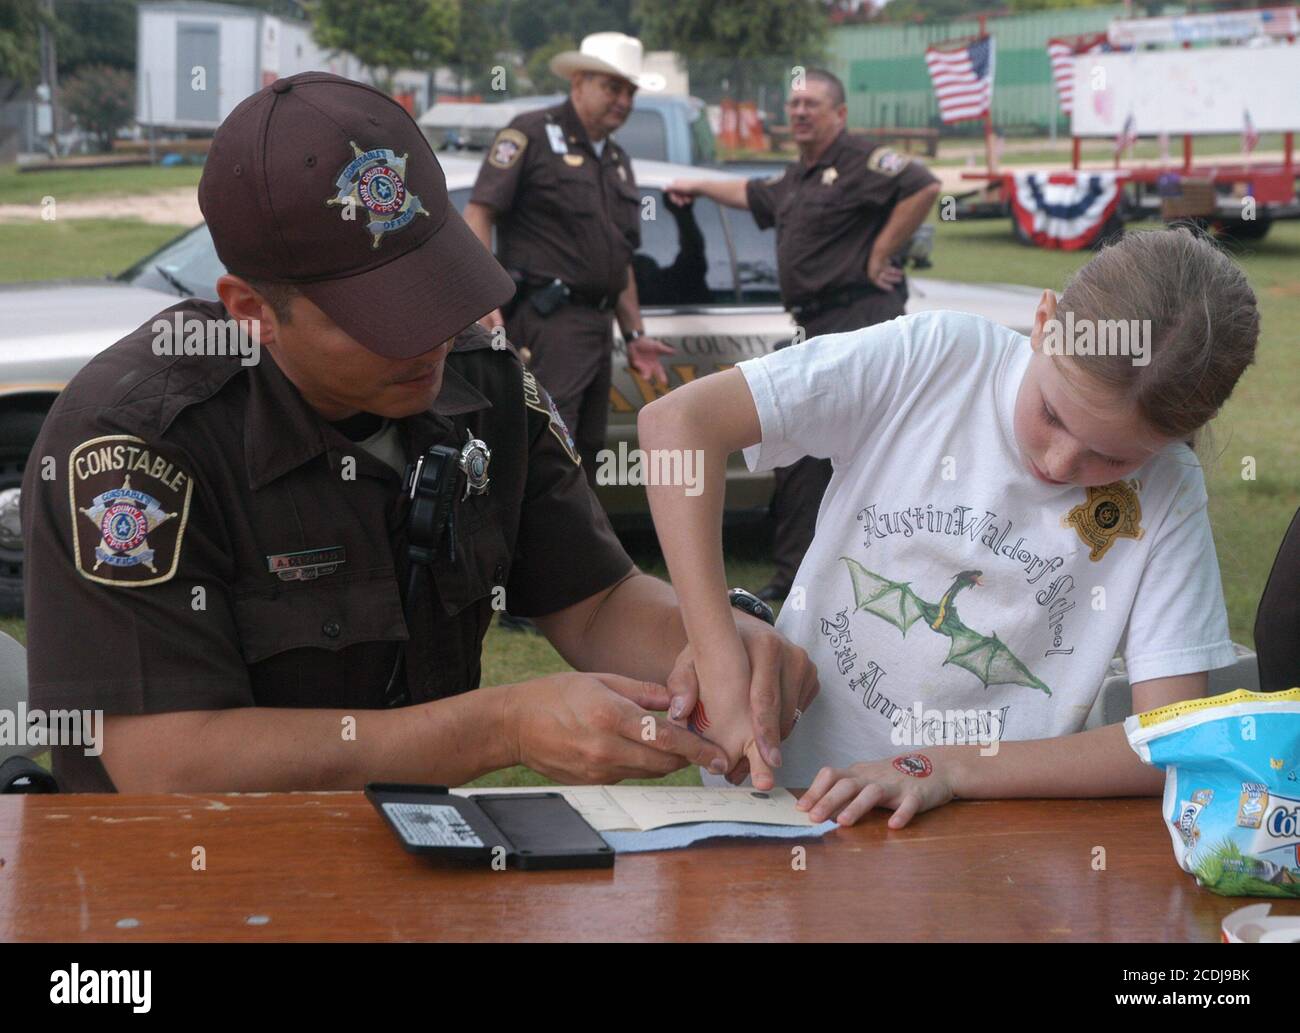 Austin, TX July 4, 2007:  A Hispanic Travis County constable fingerprints a 10-year old girl as part of a crime prevention and safety awareness campaign at a neighborhood Fourth of July celebration.  Editorial use only.    ©Bob Daemmrich Stock Photo